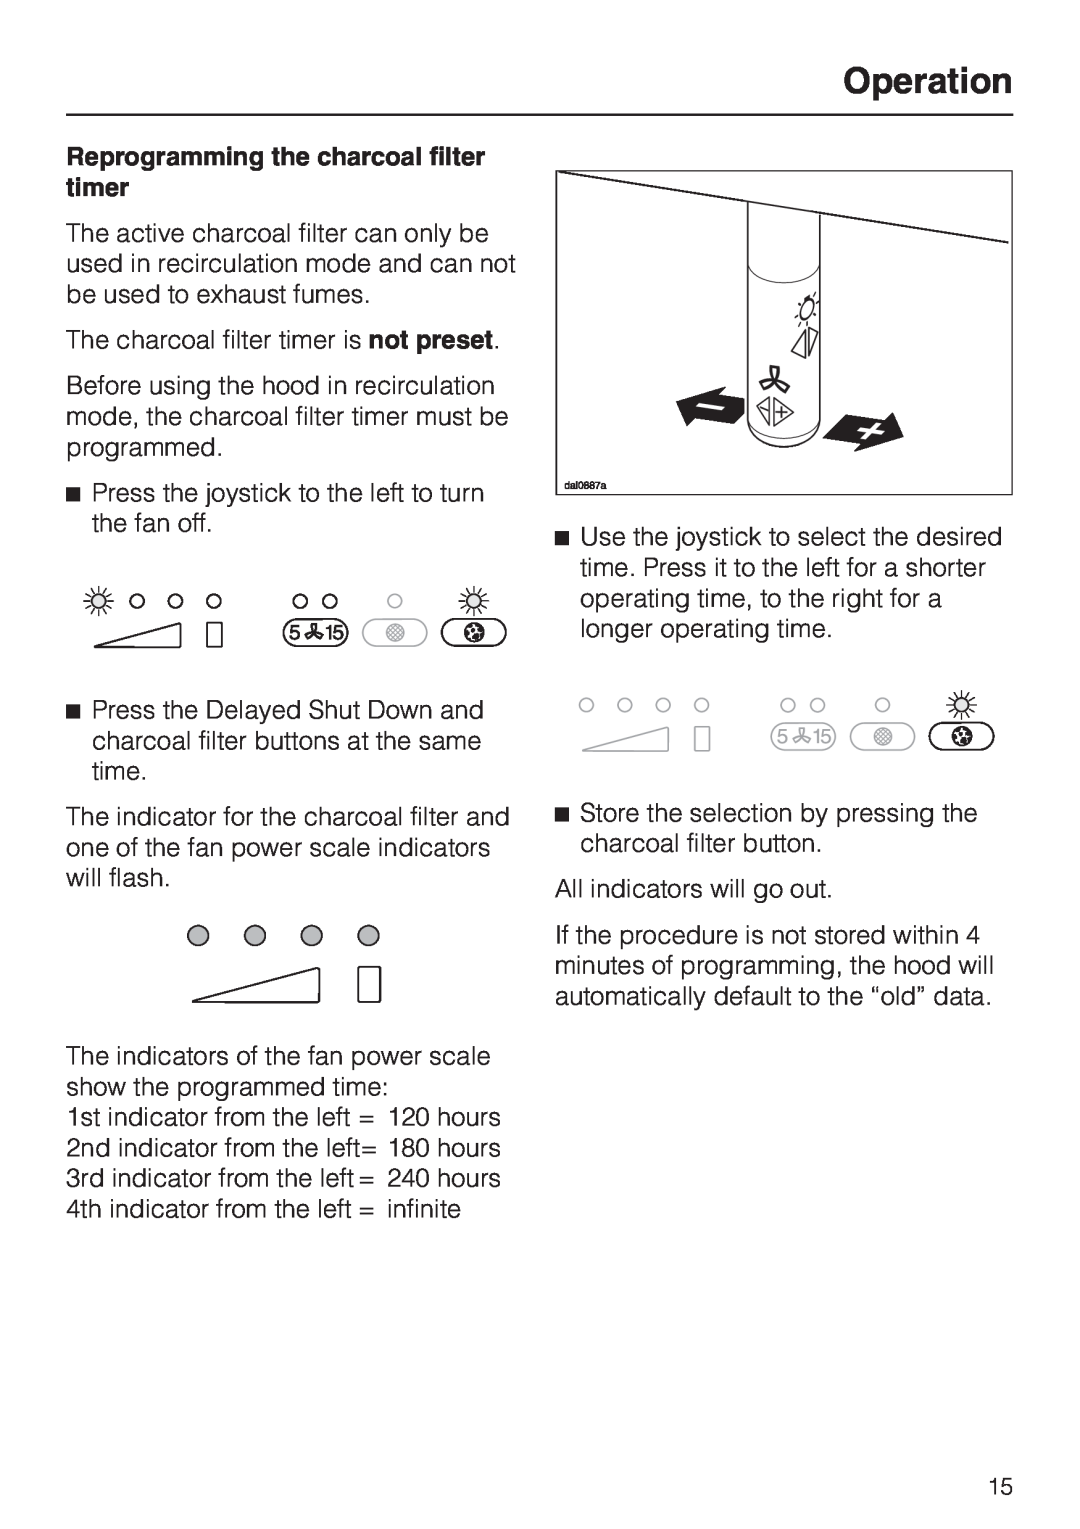 Miele DA362-110 installation instructions Reprogramming the charcoal filter timer, Operation 